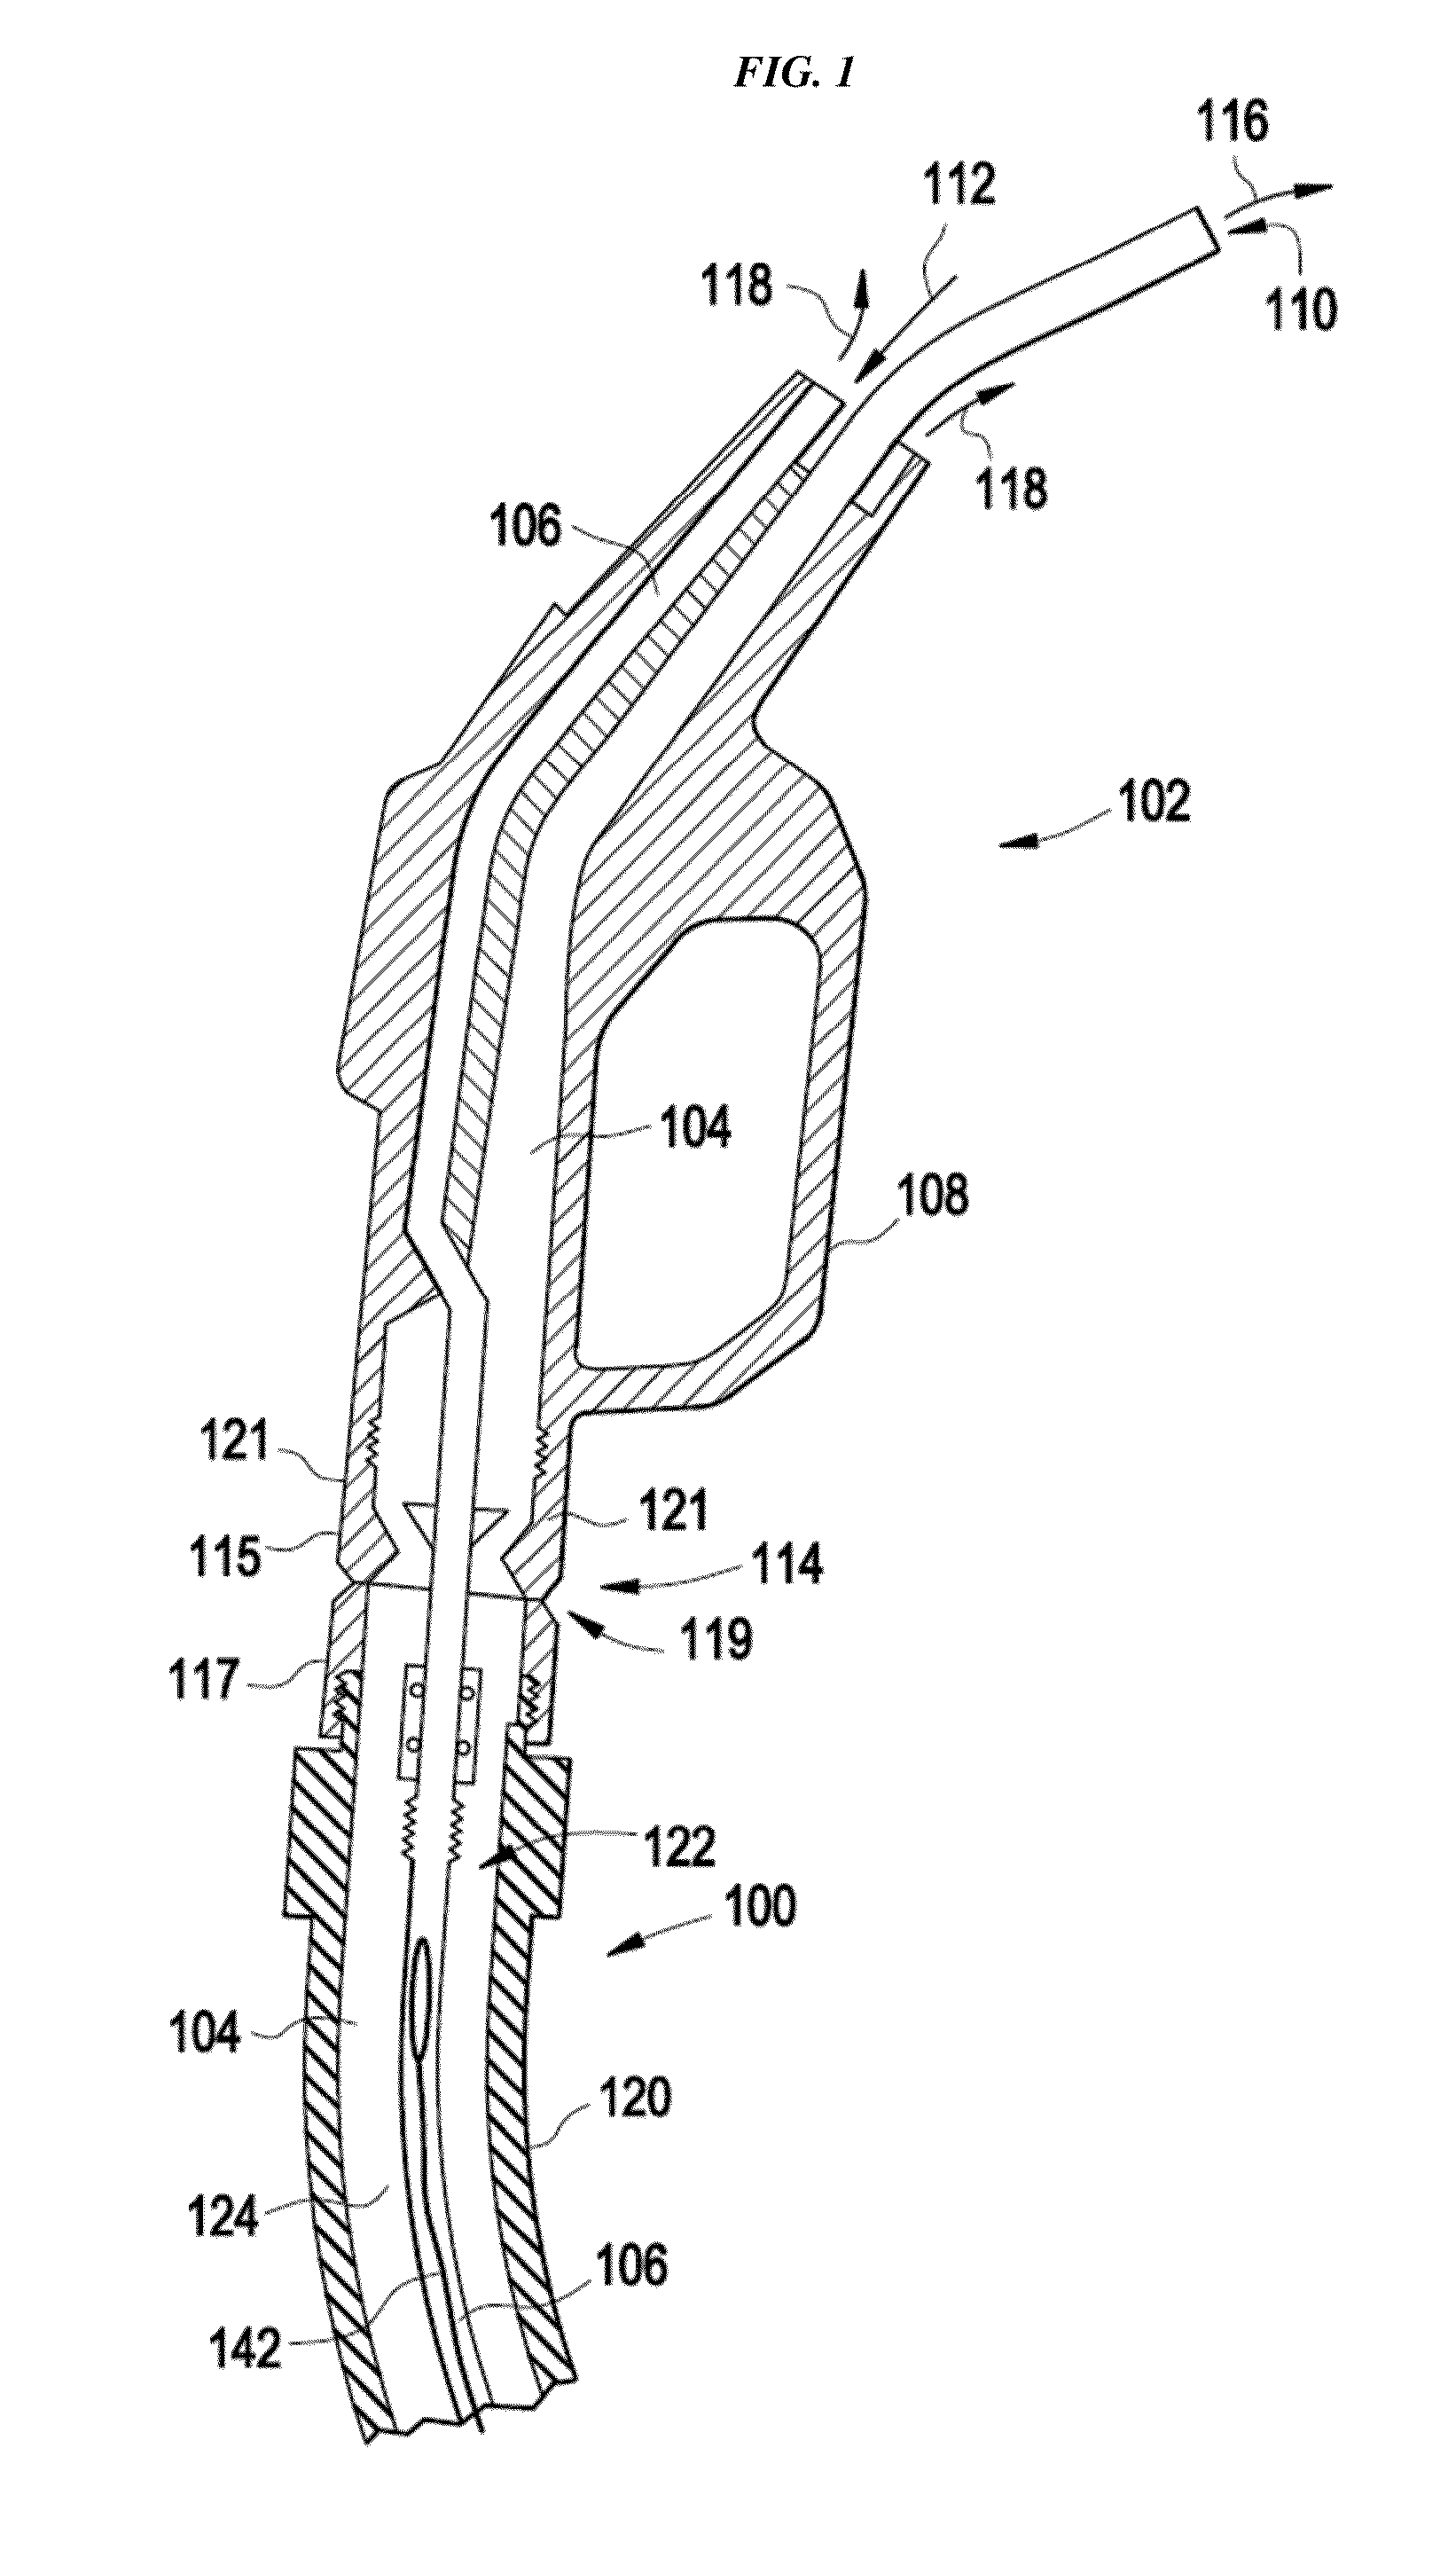 Devices and Methods for Heating Fluid Dispensers, Hoses, and Nozzles